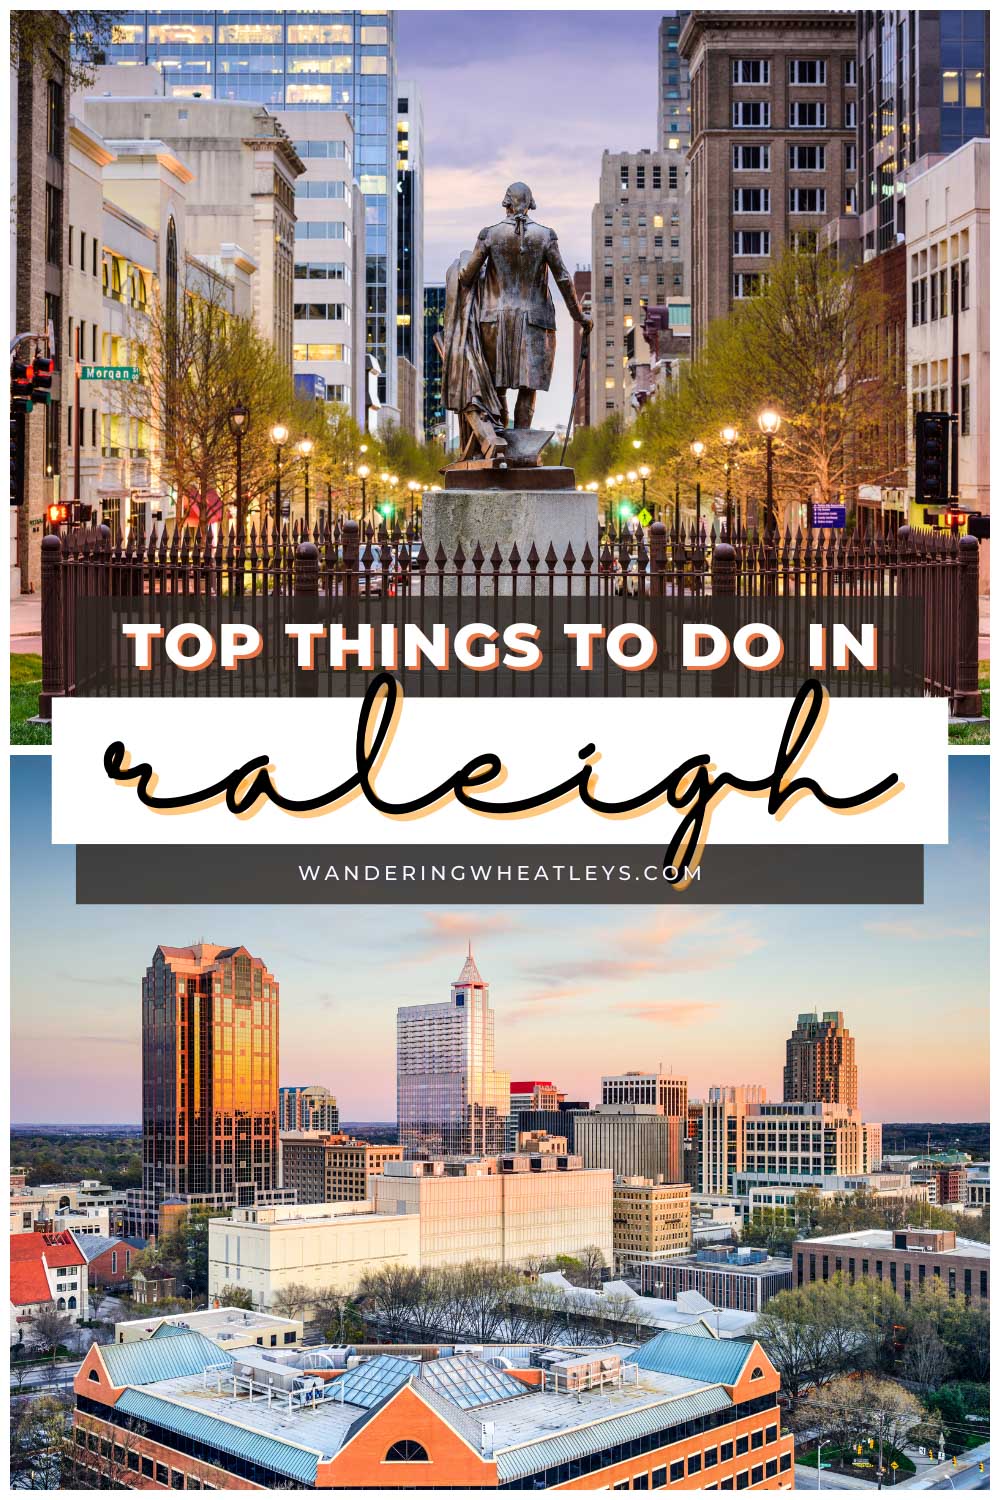 The Best Things to do in Raleigh